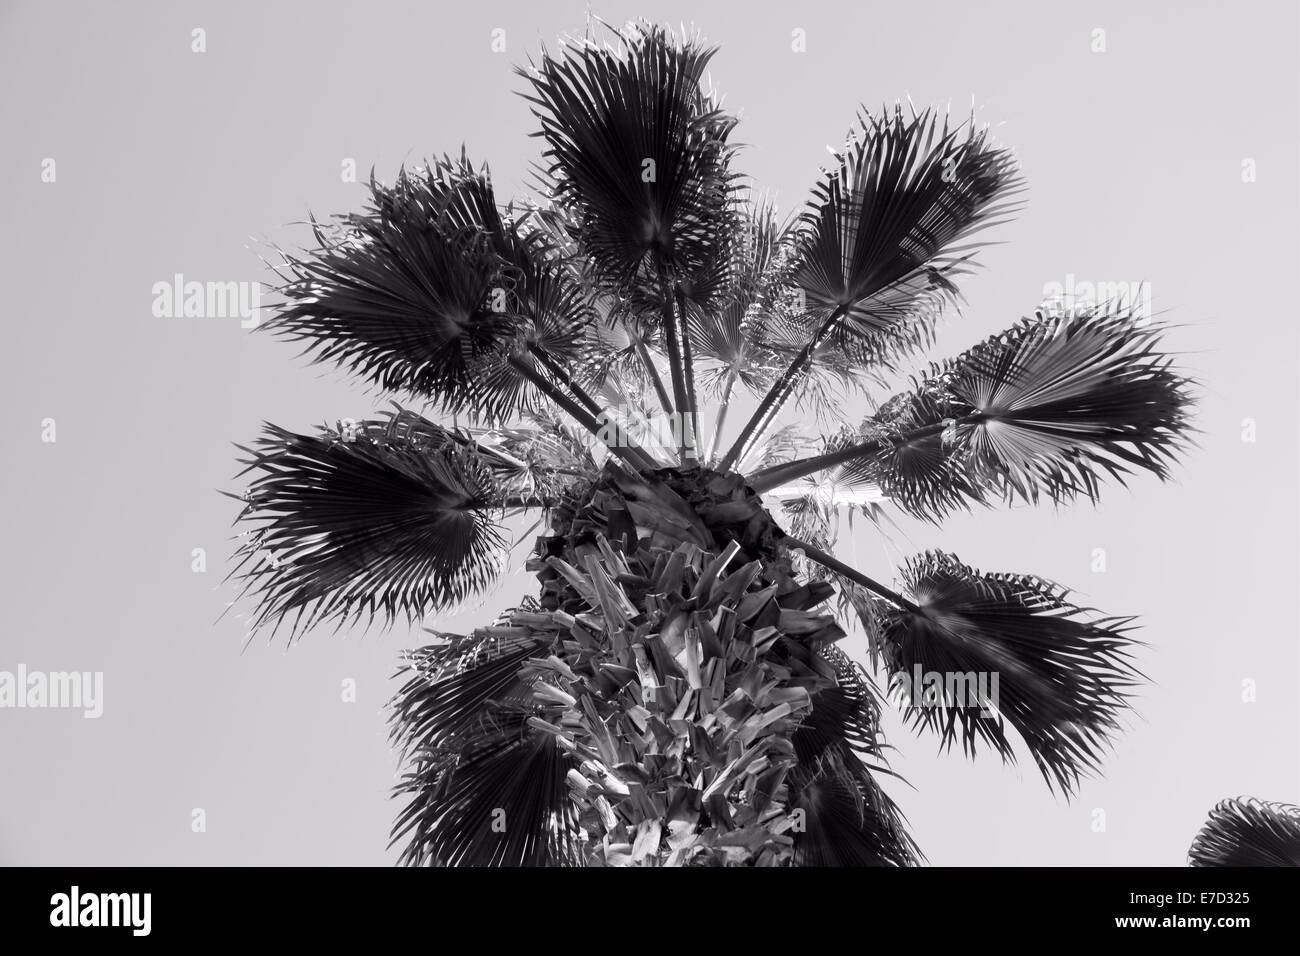 MONOCHROME PICTURE TOP BRANCHES OF PALM TREE Stock Photo